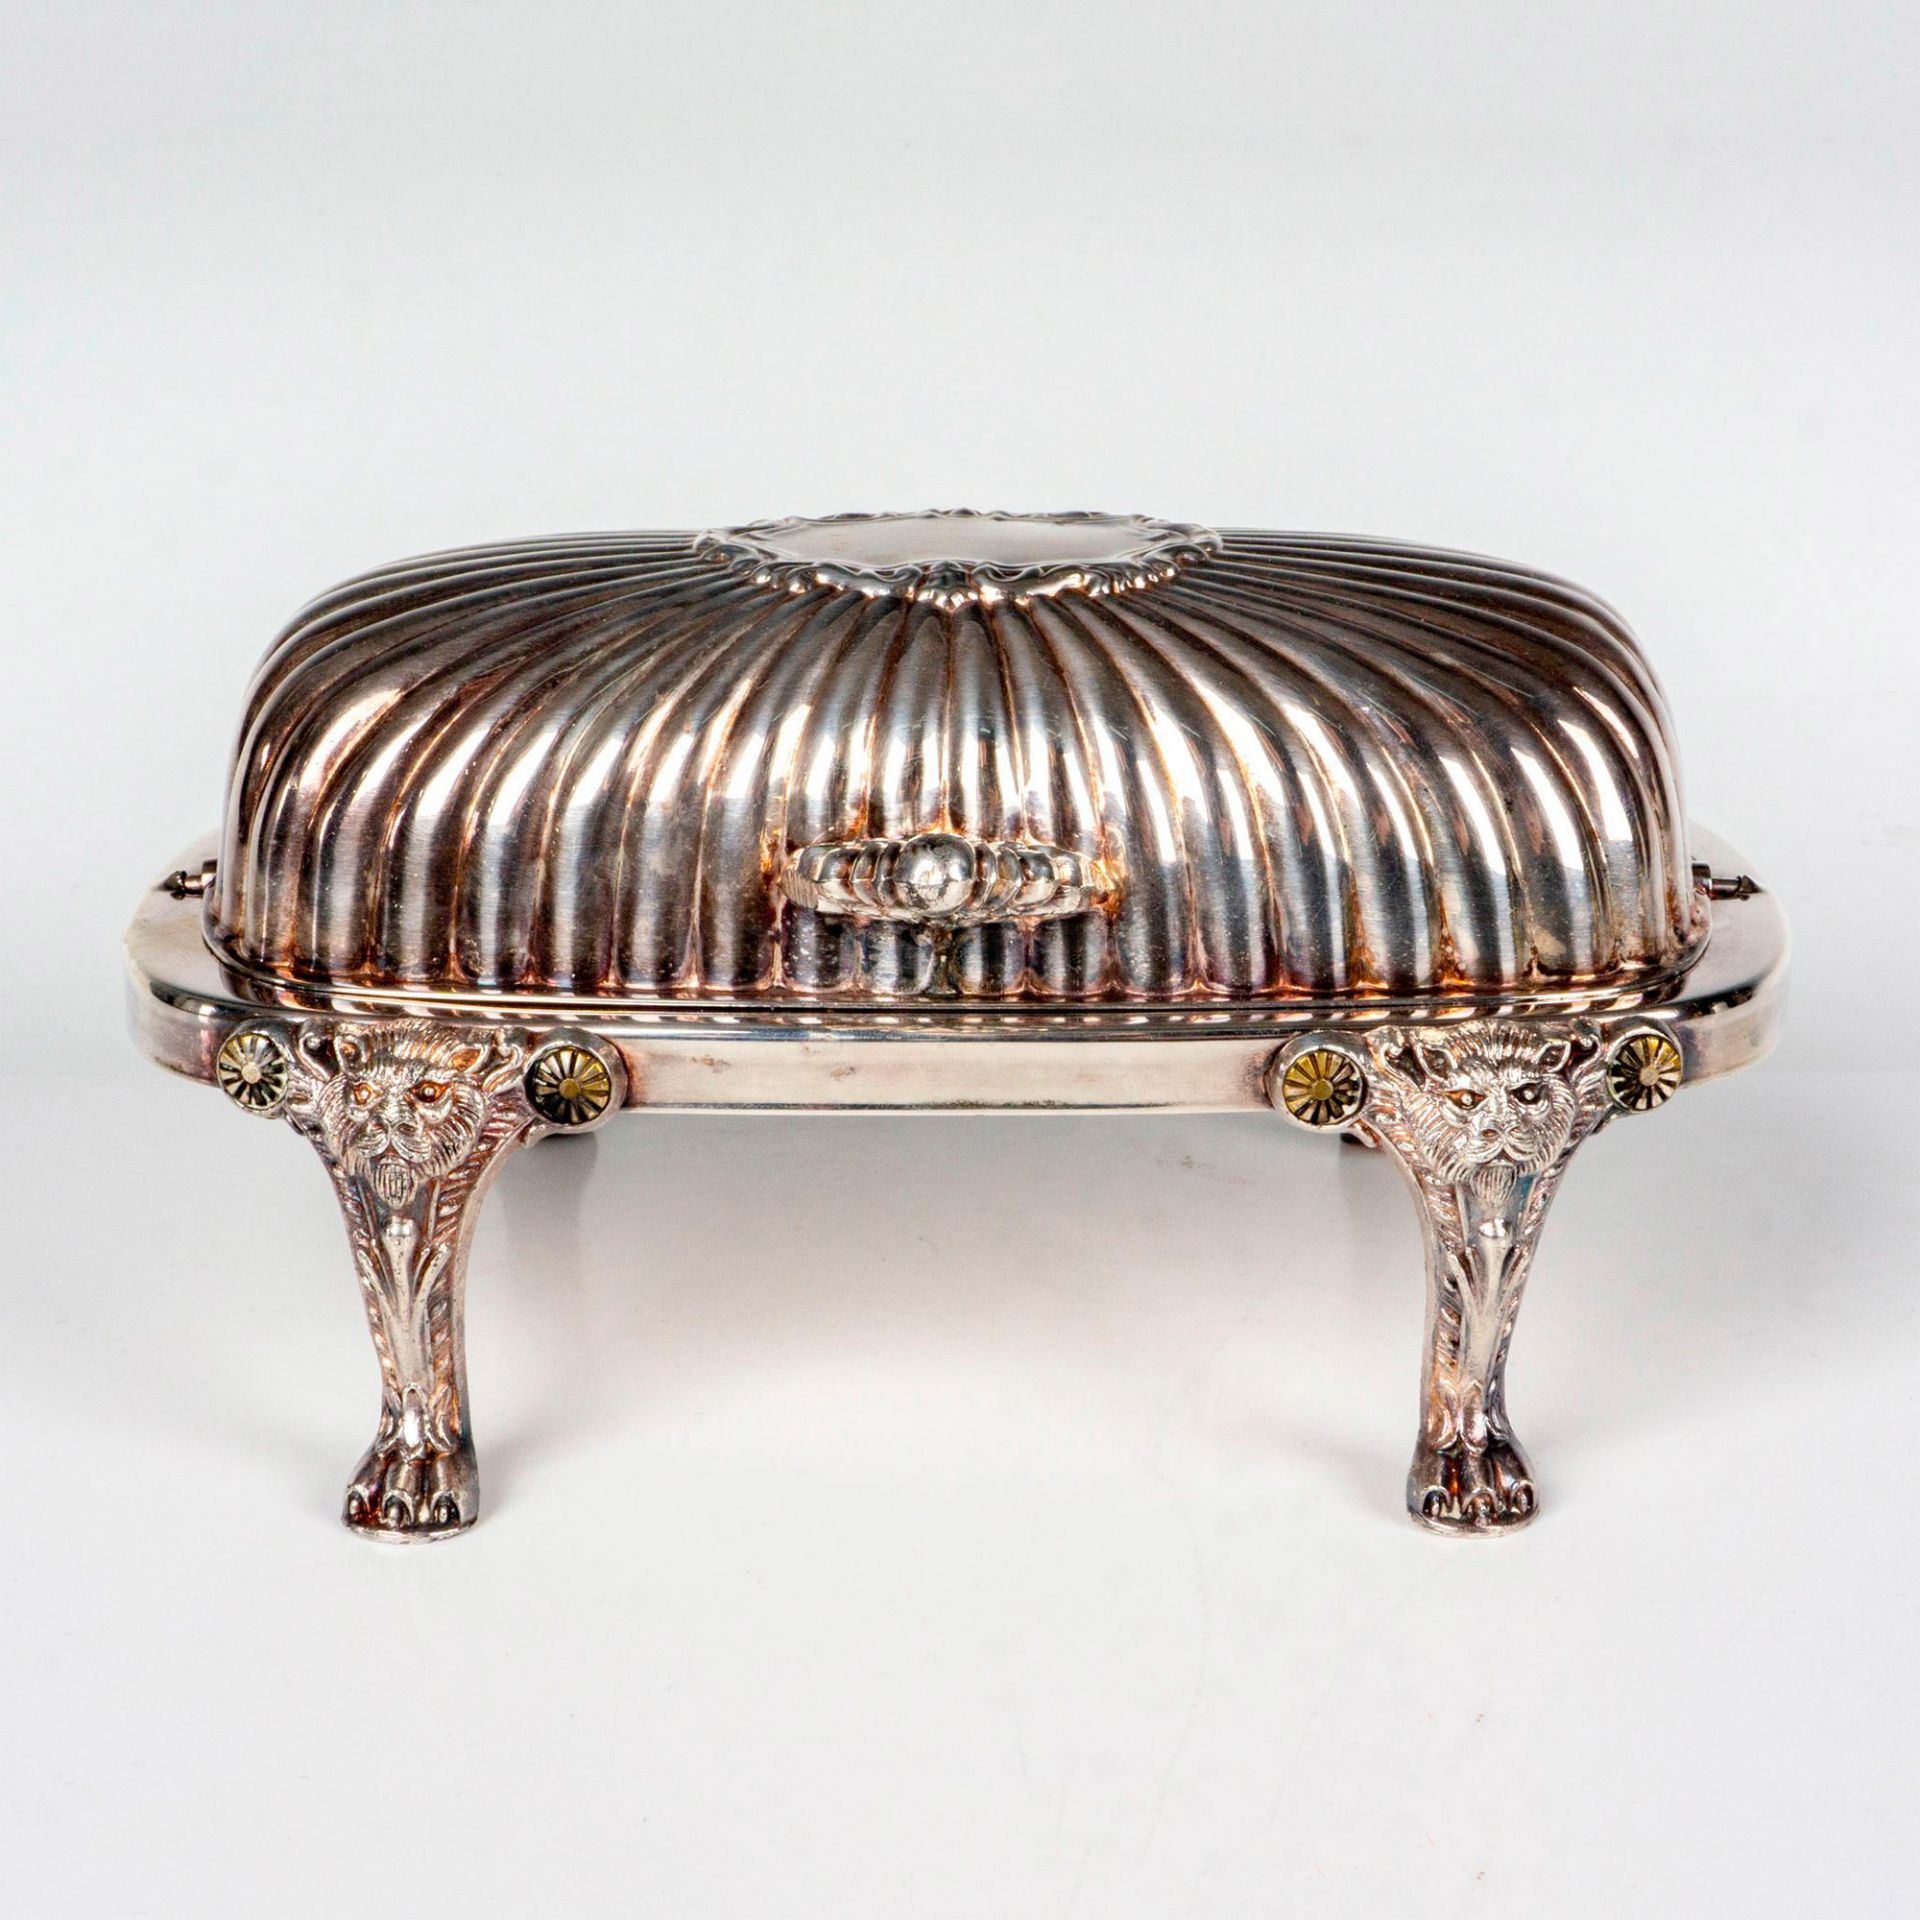 Vintage Silverplate Footed Butter Dish